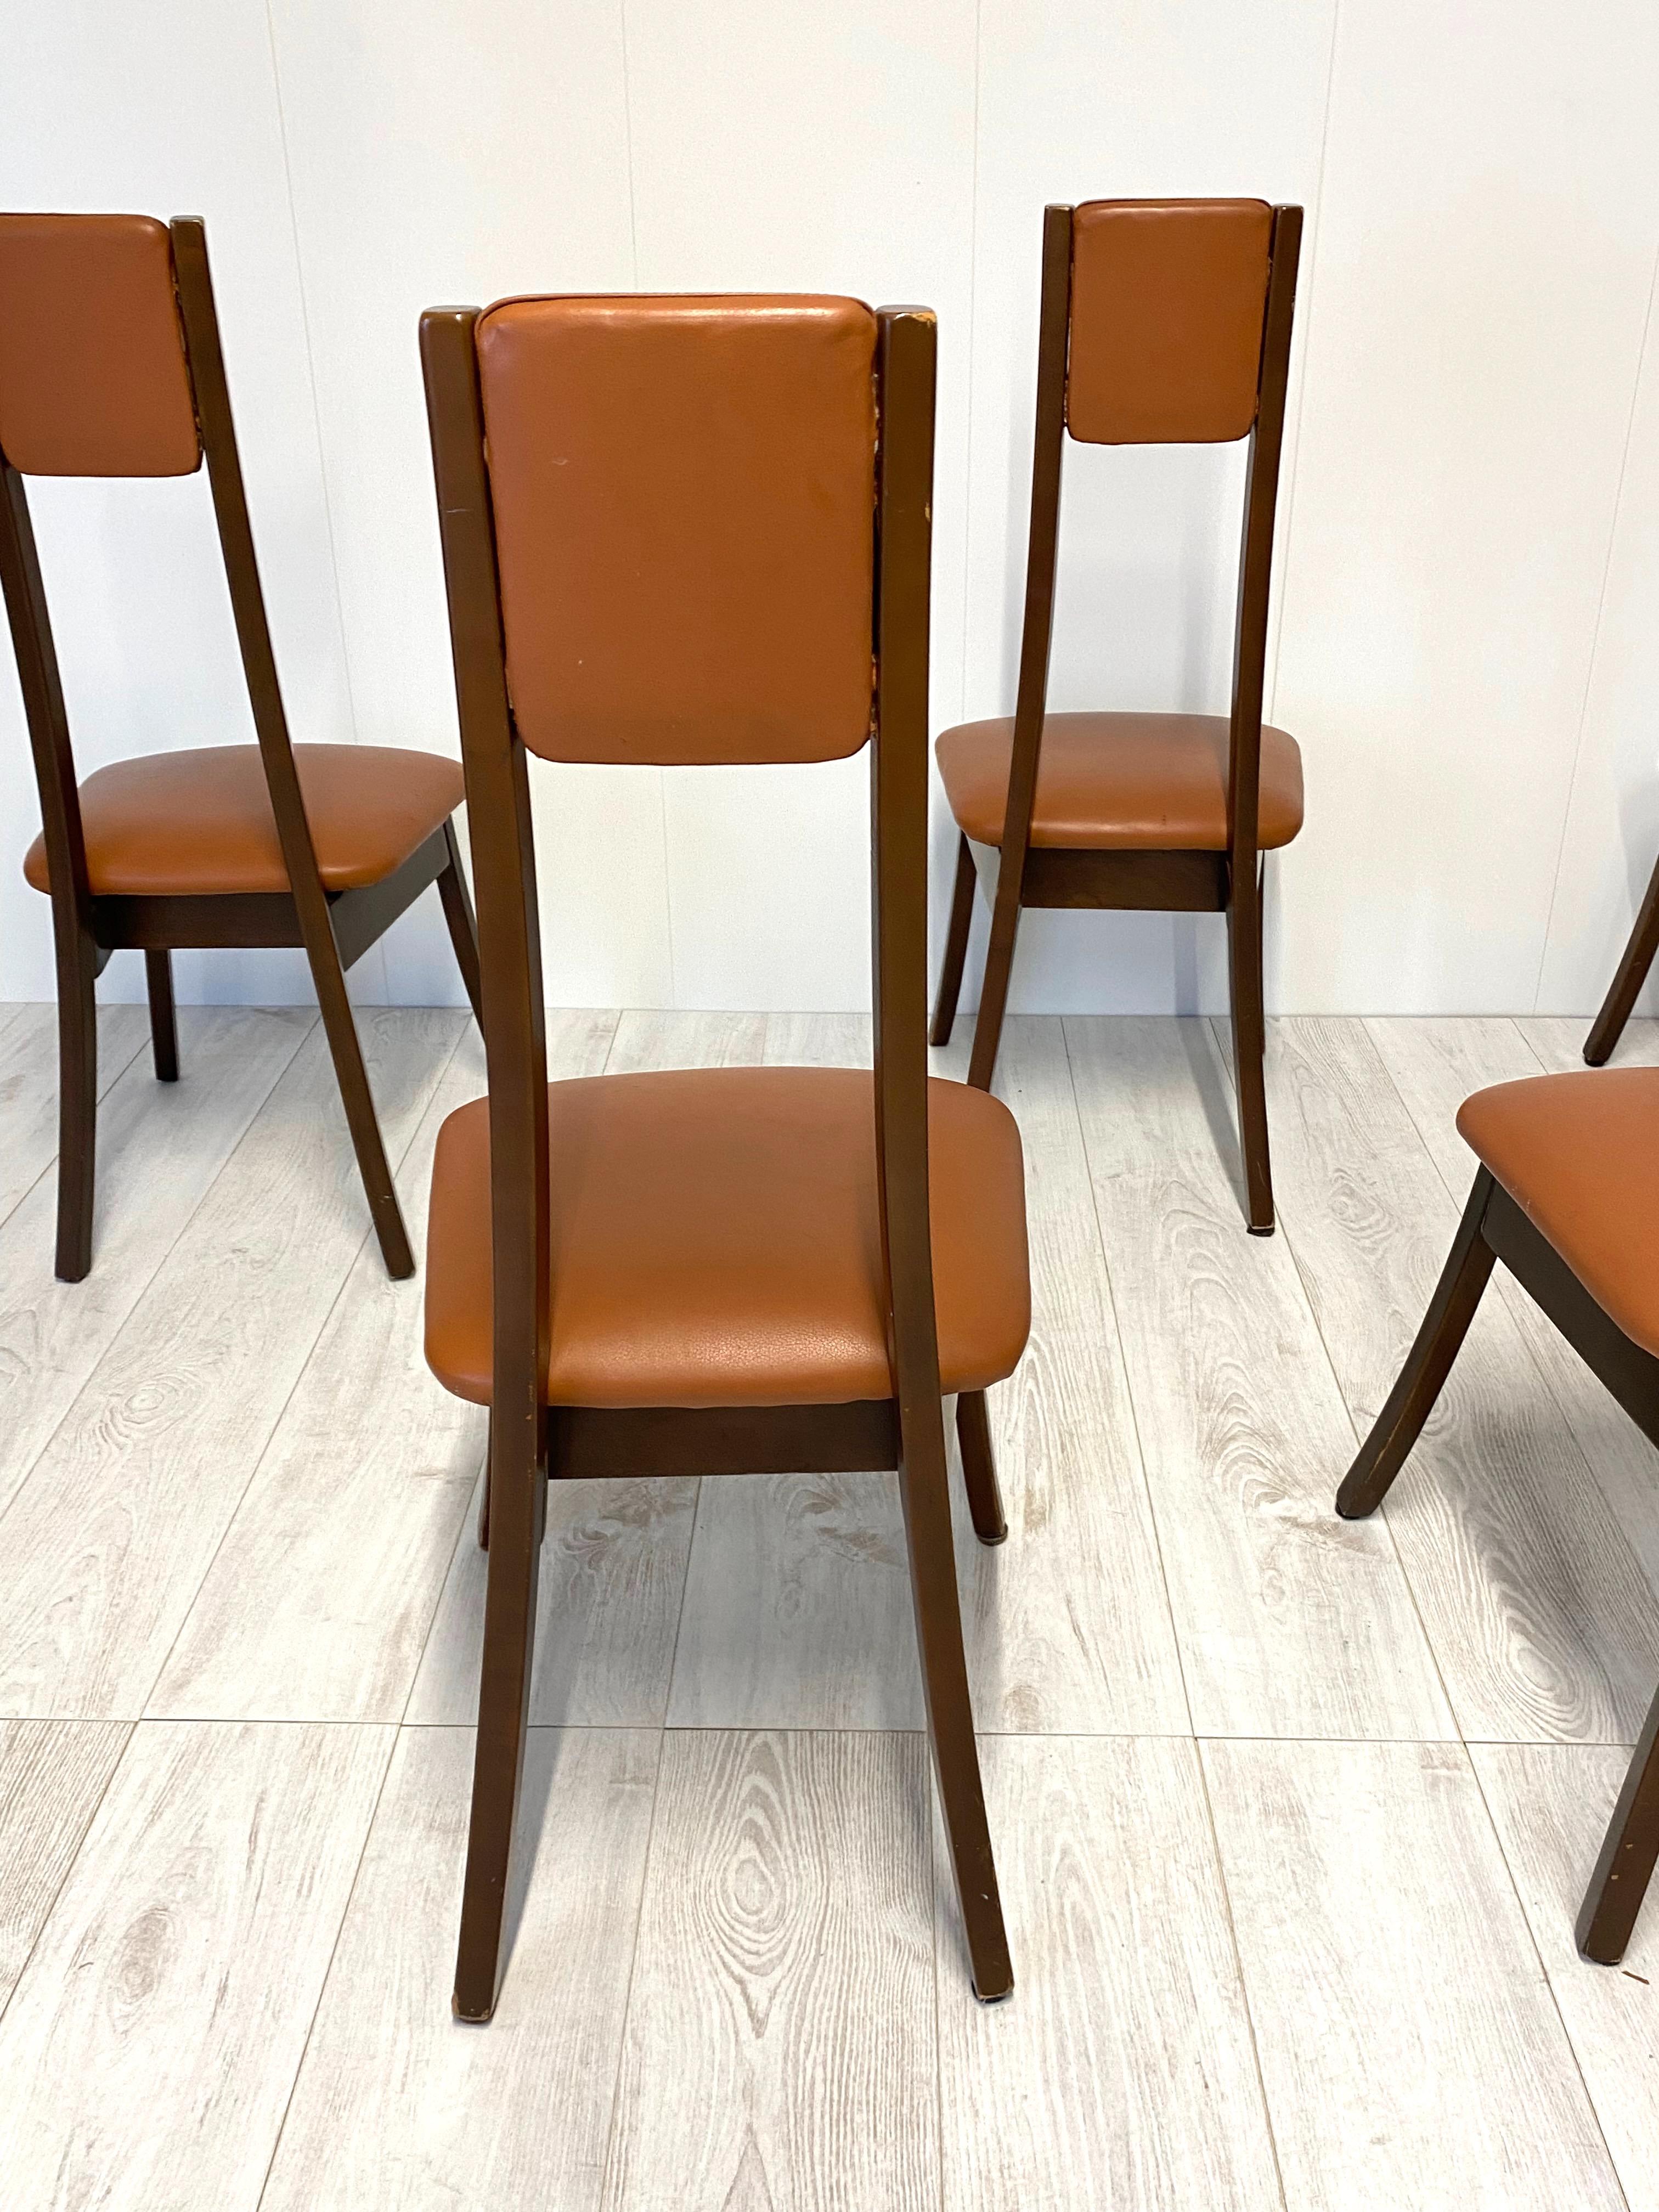 Model Programma S11 Dining Chairs by Angelo Mangiarotti, Set of 6 For Sale 5